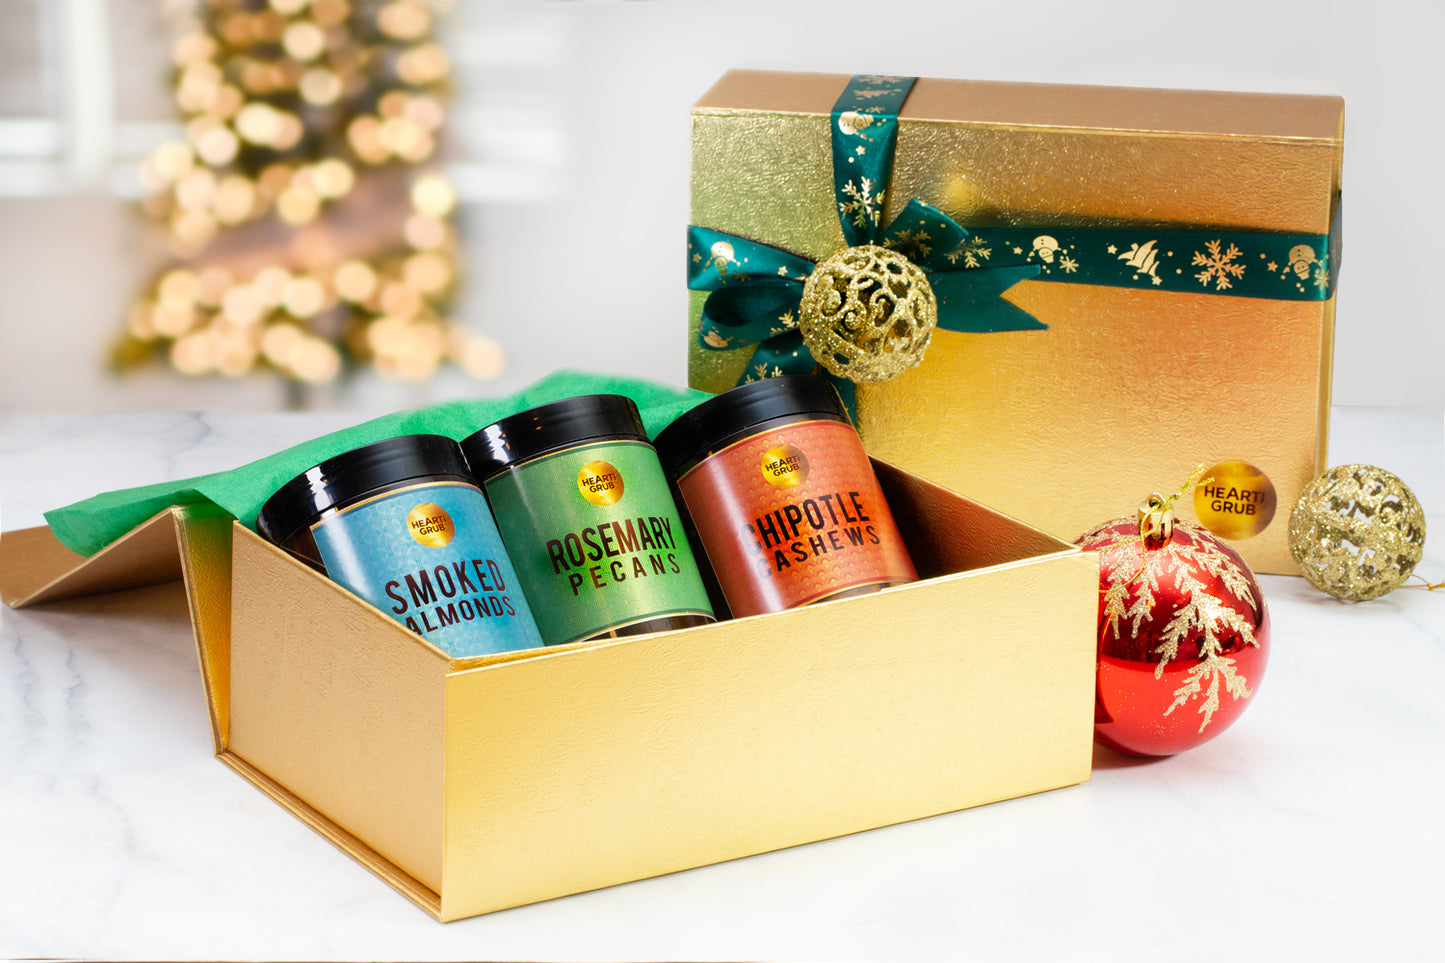 Chrsitmas Gifts. Holiday Gifts. MAd ein UAE. Gourmet Gifting. HeartiGrub. Nut Butters. Home Delivery. Nuts. 